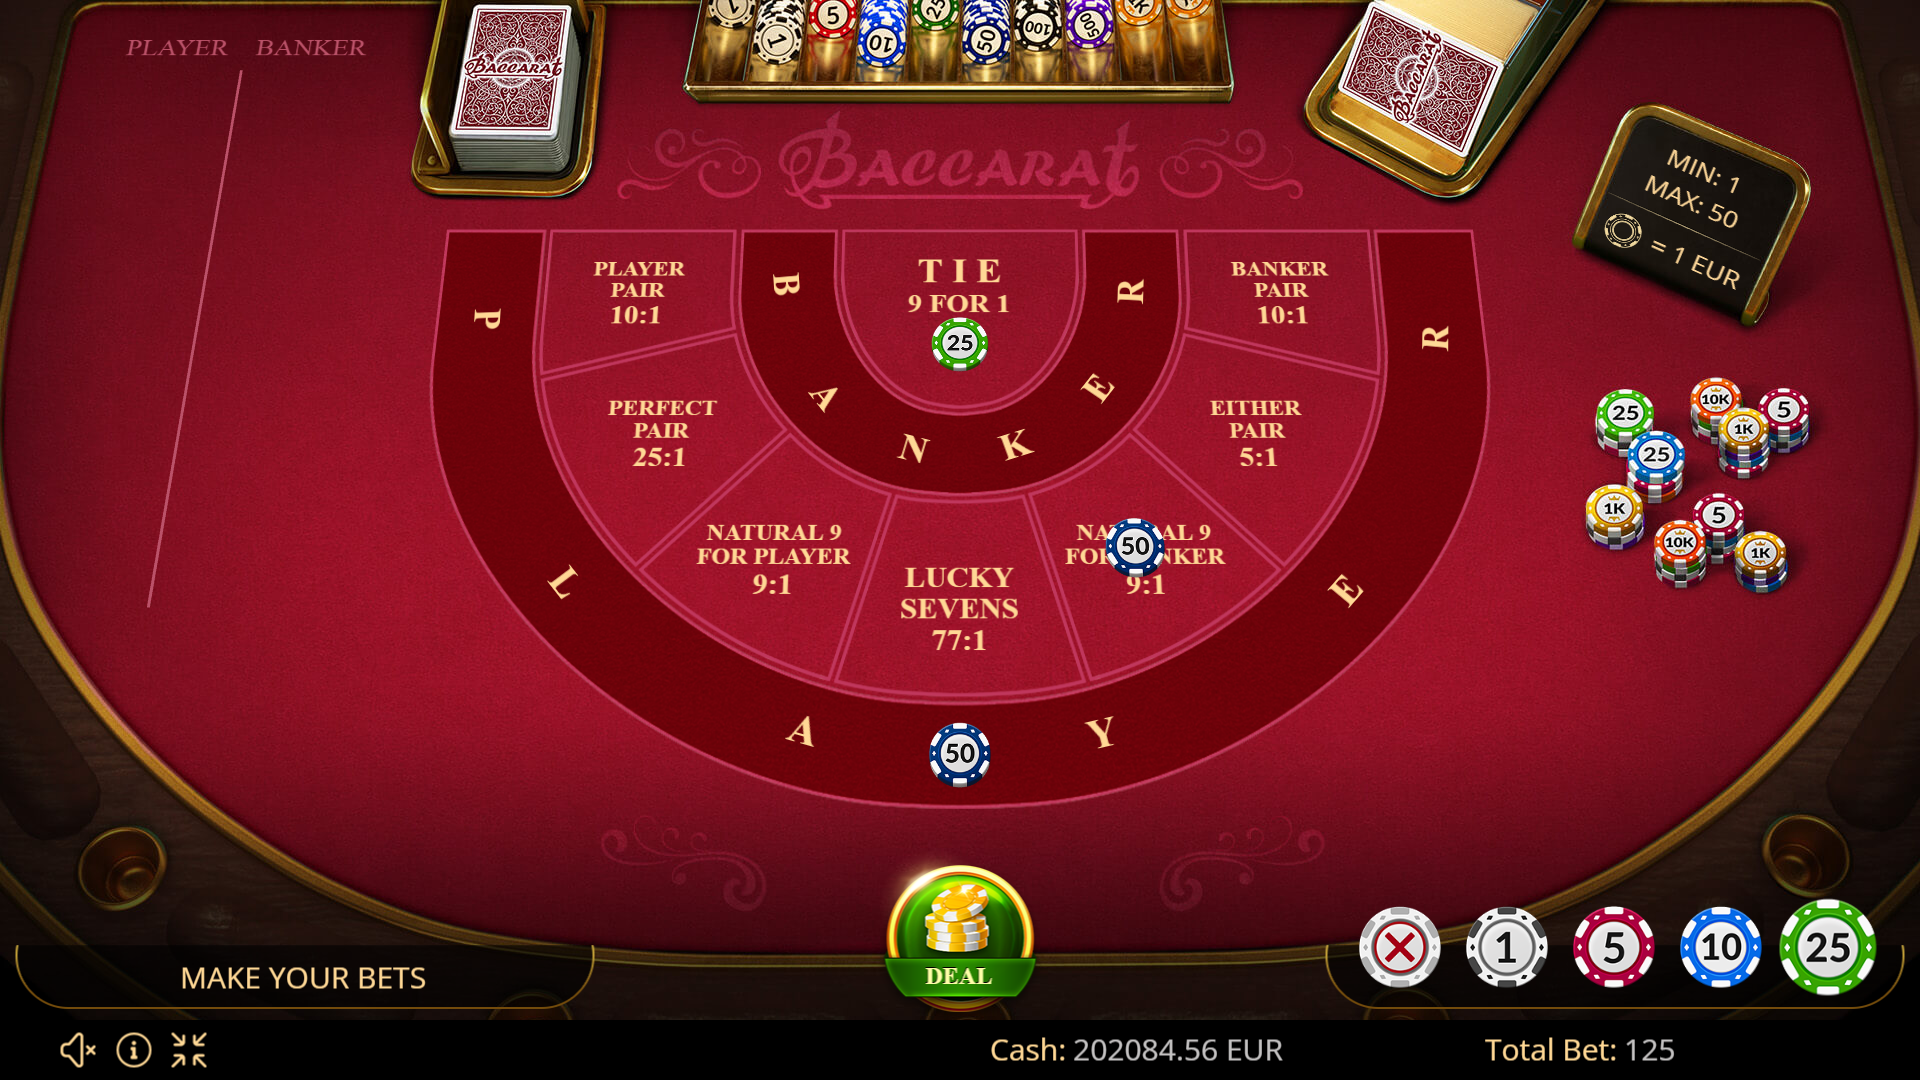 Bet on Baccarat